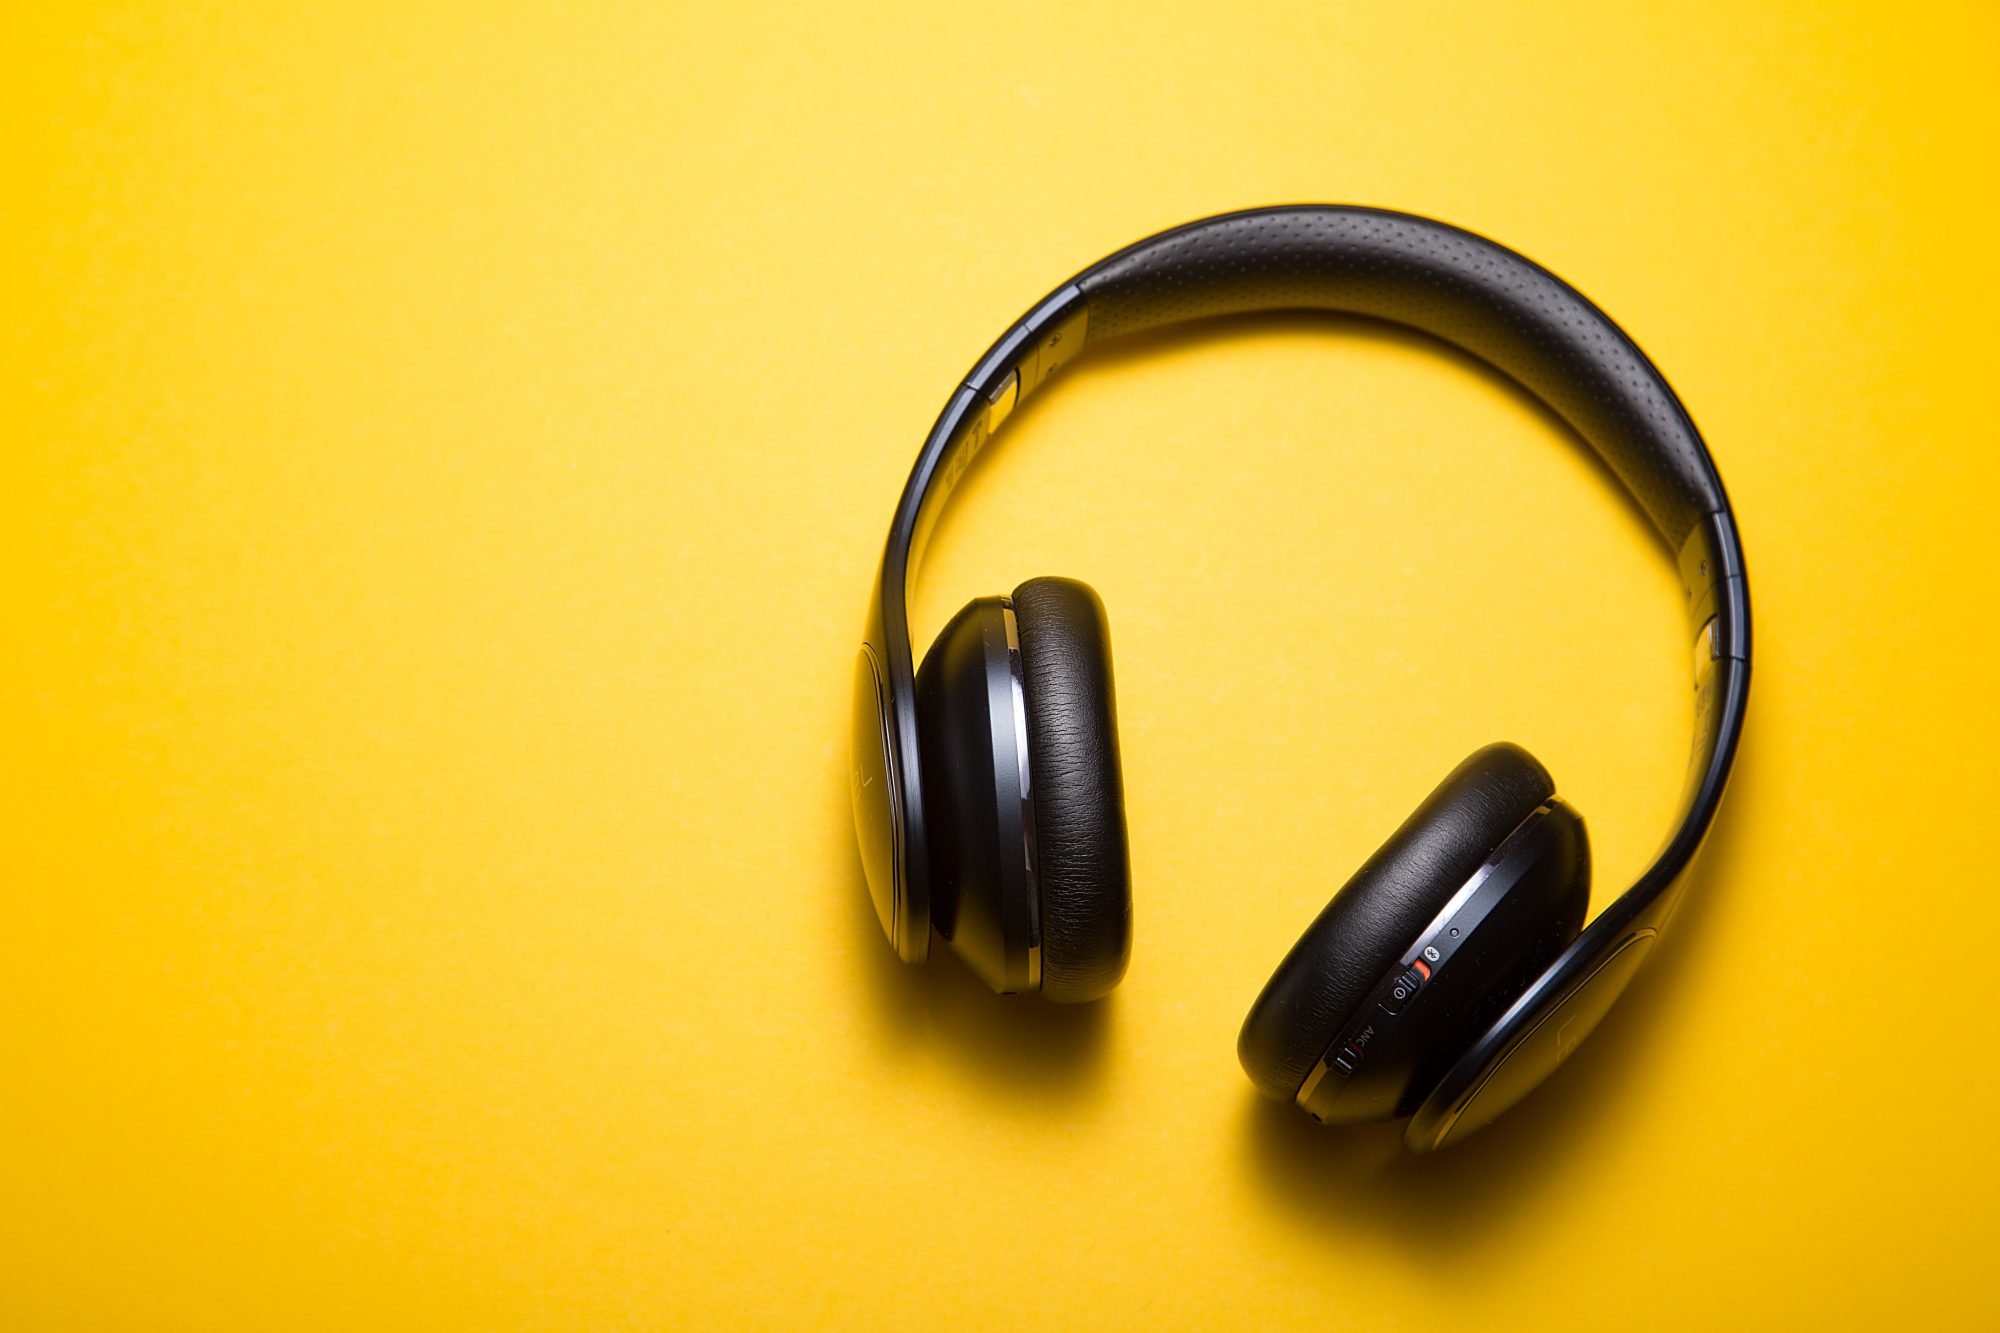 Listen and learn! Valuable UXR podcasts and related recordings